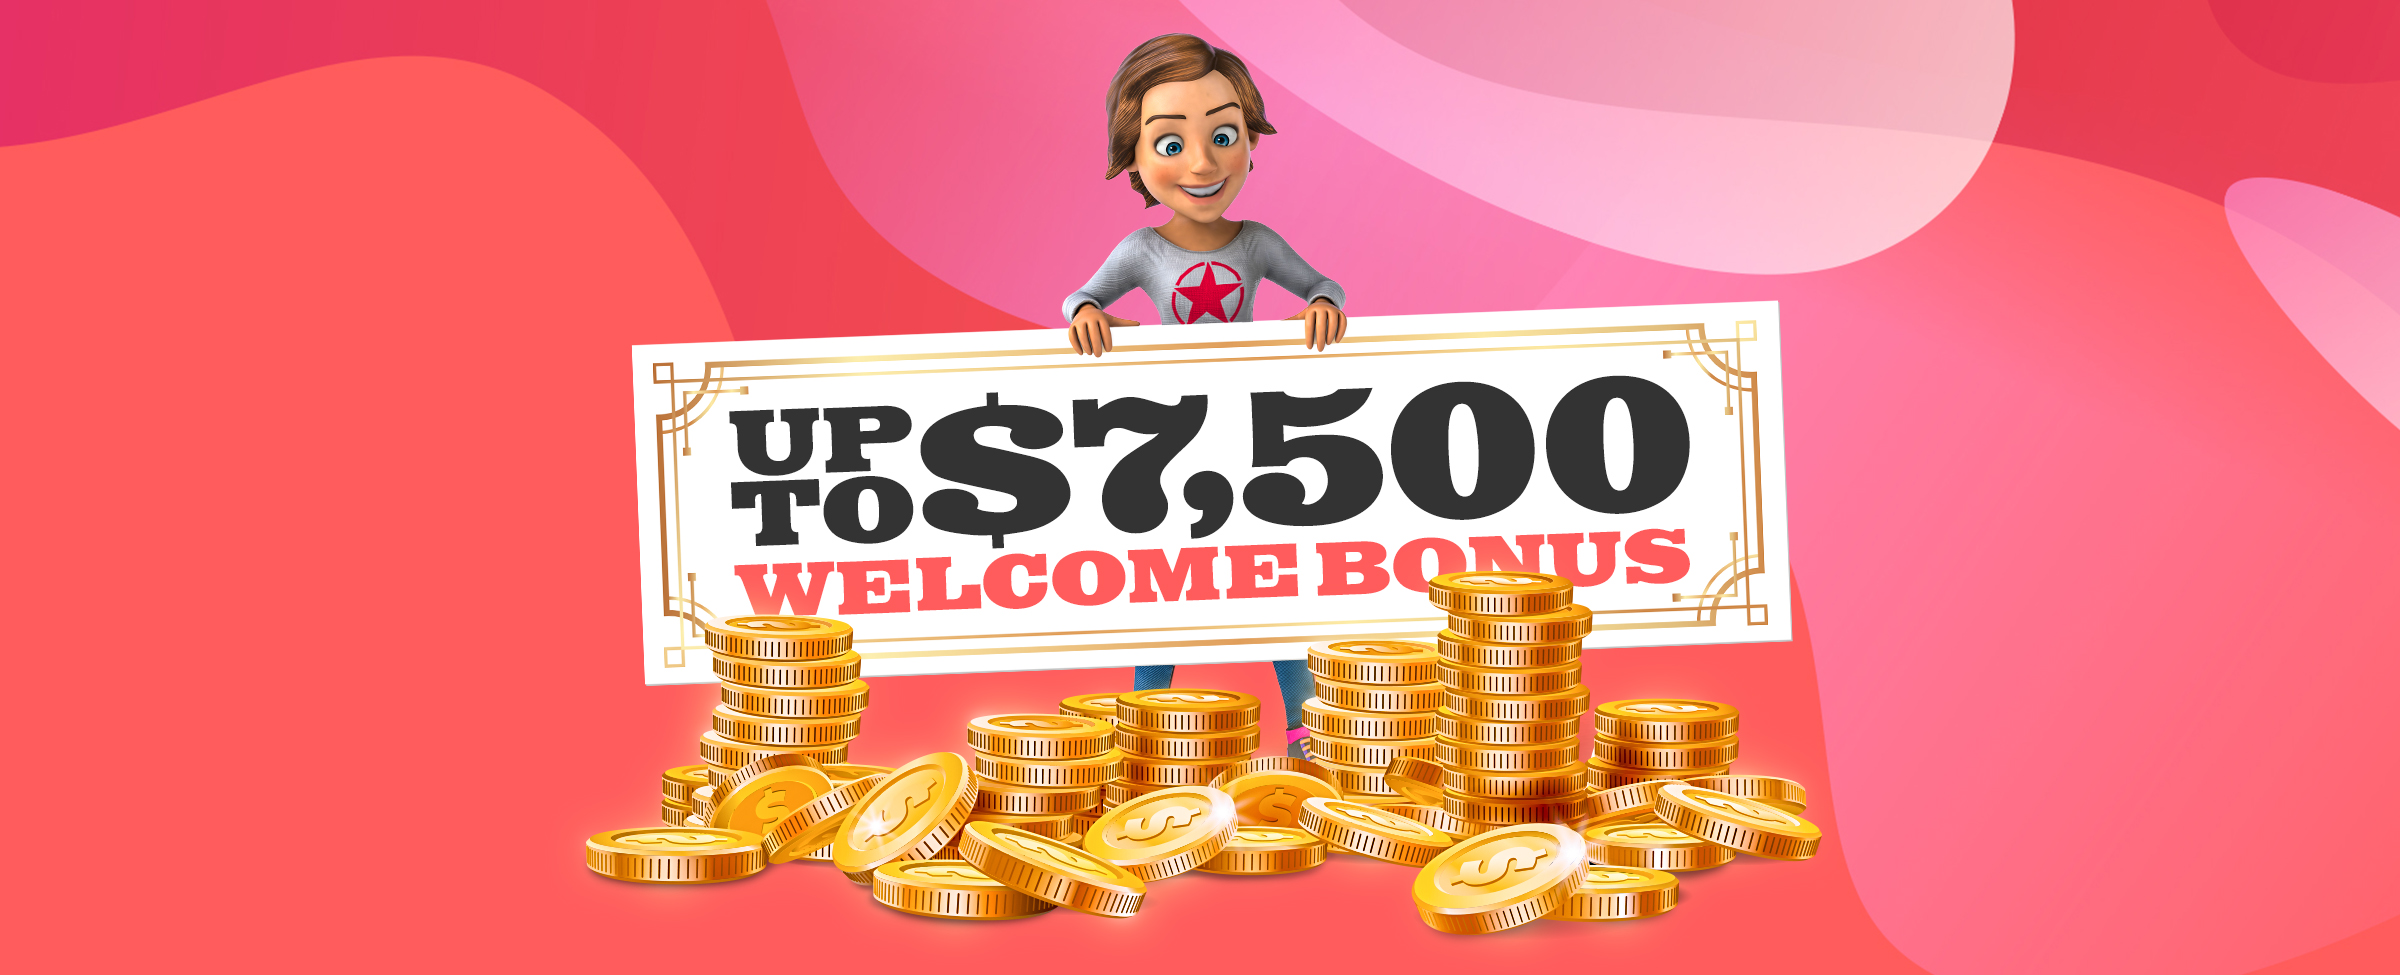 We know how to give a proper “Welcome!” here at SlotsLV, and we’ve got the zeros to prove it! Here’s how you’ll collect your free bonus bounty today.